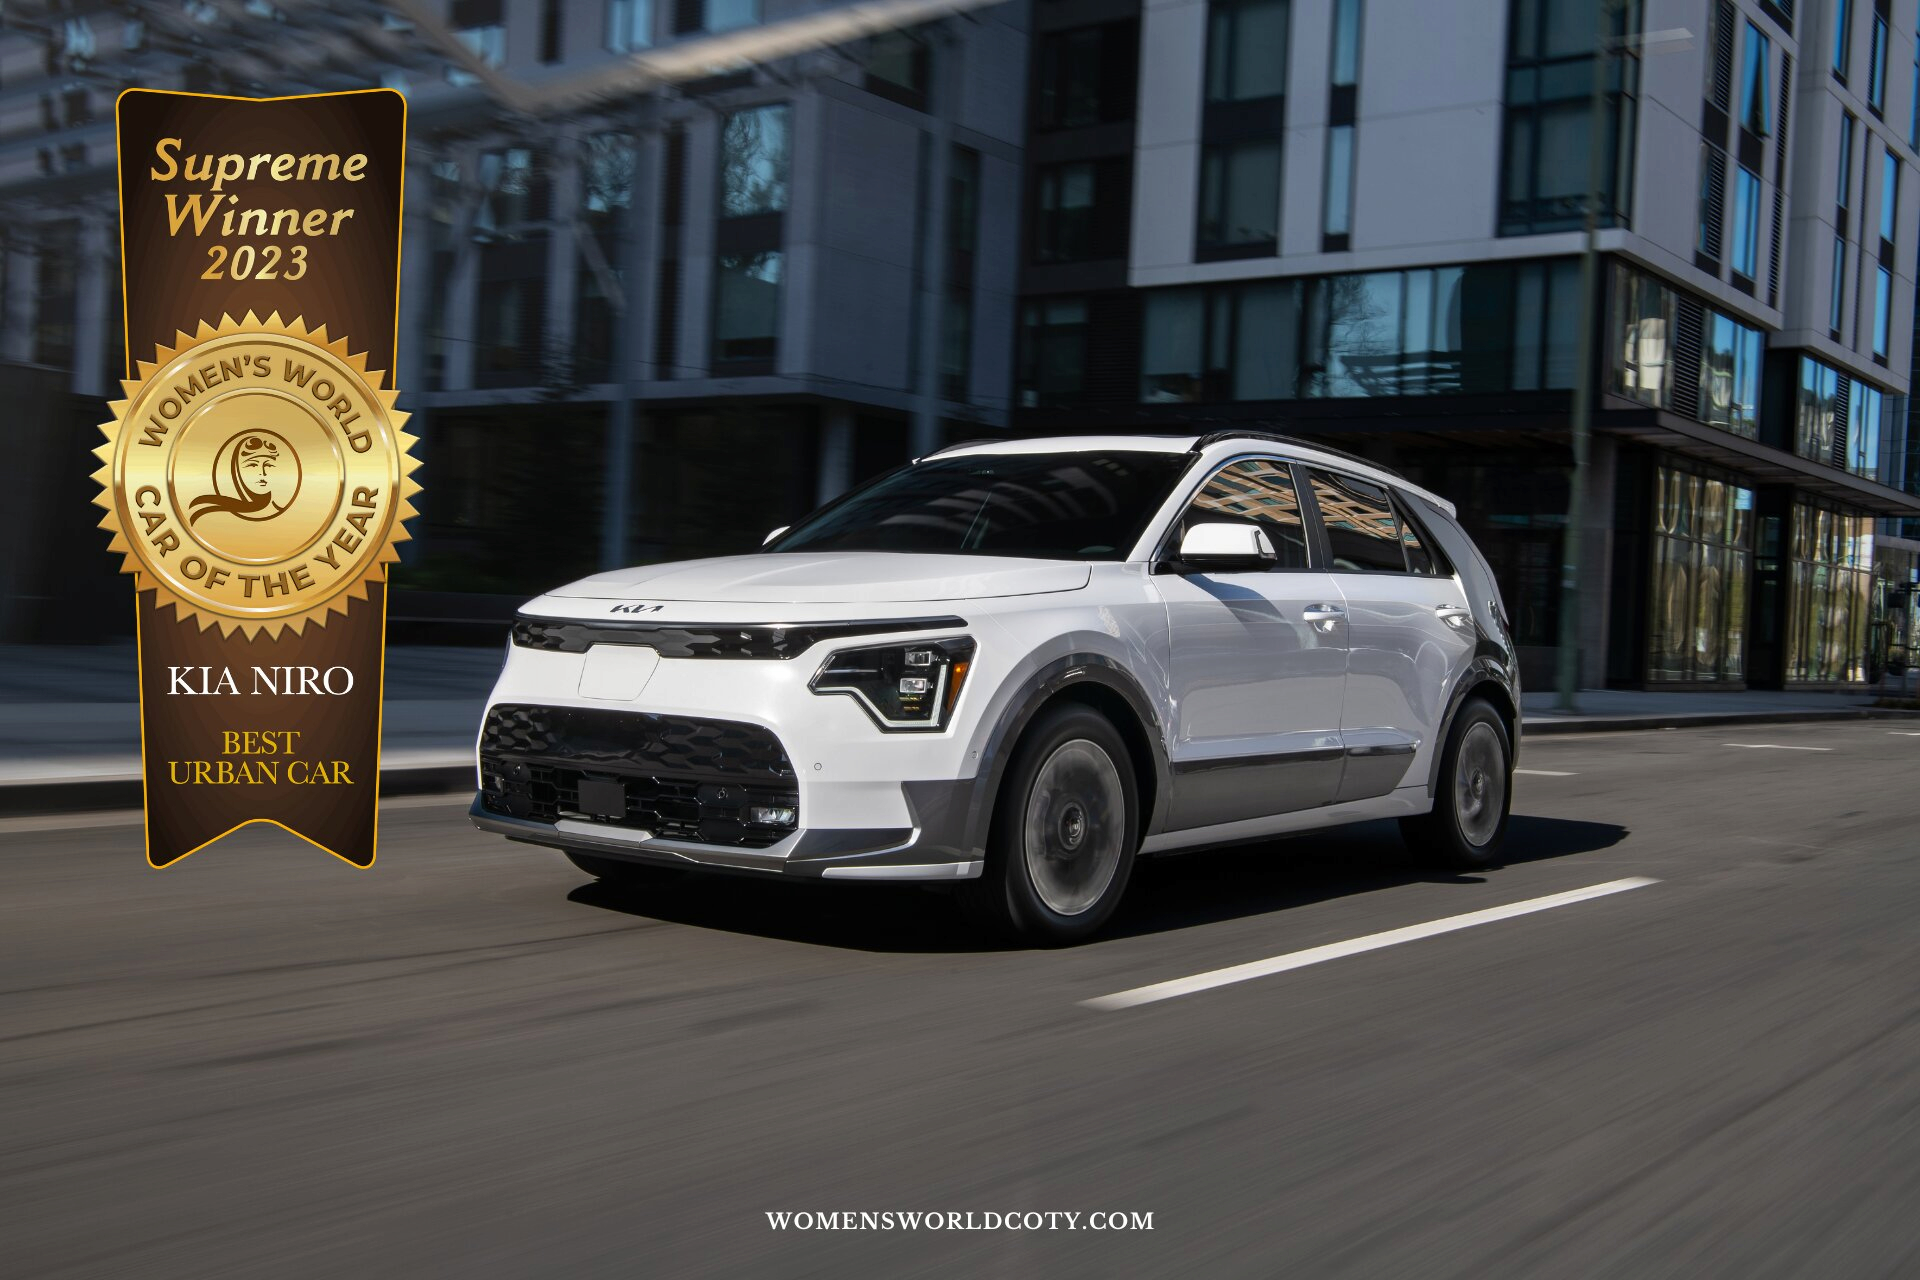 Kia Niro is voted Supreme Winner of the Women’s World Car of the Year